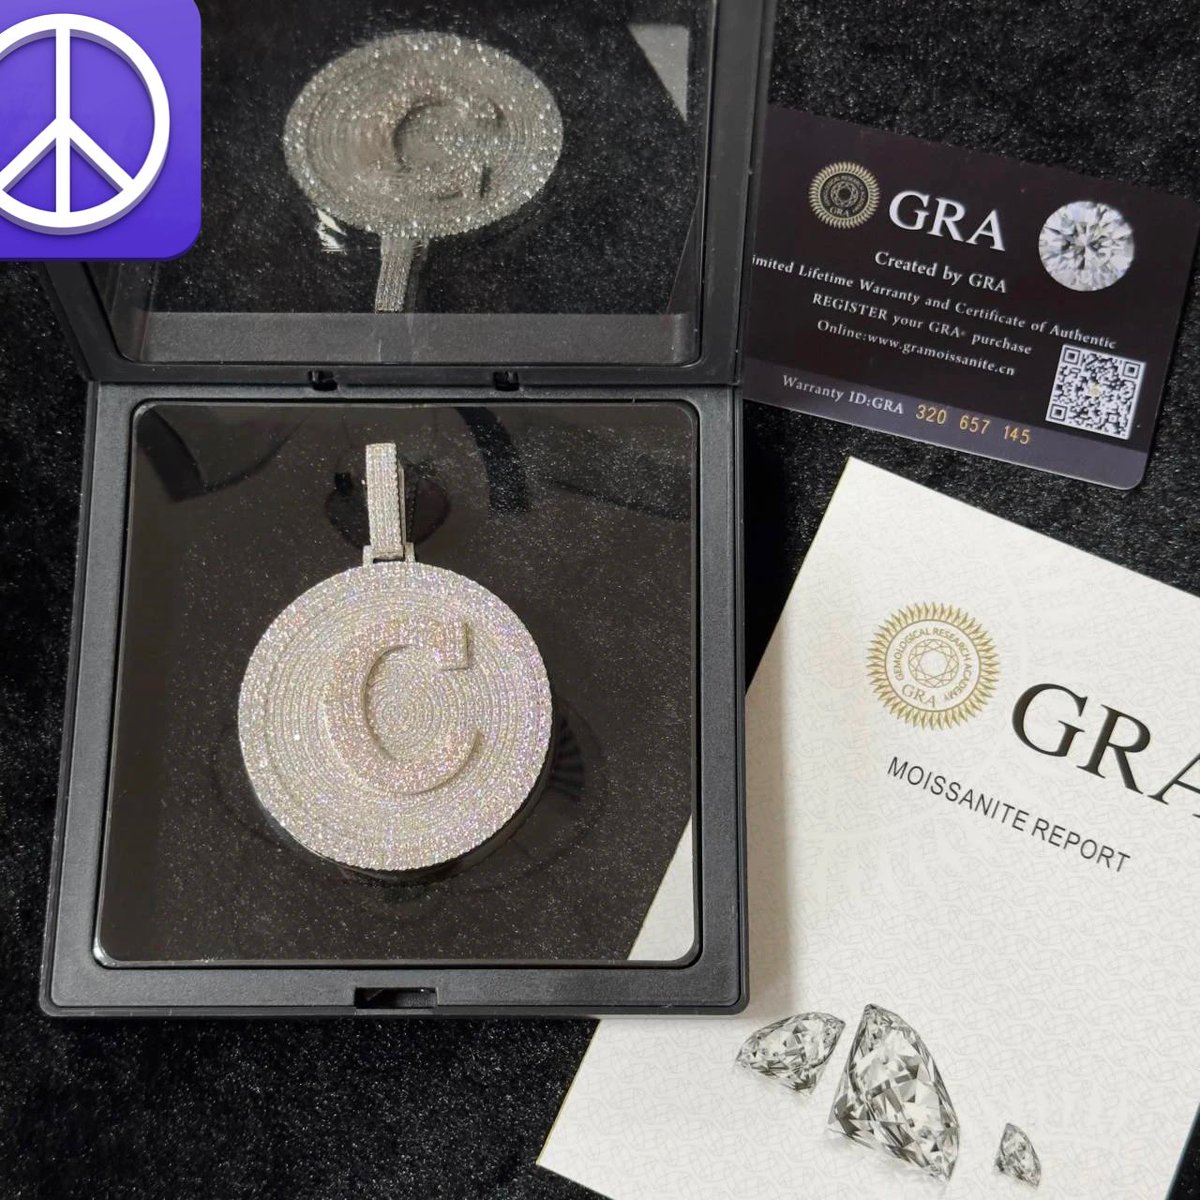 VVS Moissanite customized pendant 
Item comes with a twist chain and GRA certificate 
Delivery takes 3-4 weeks 
Price : 900k